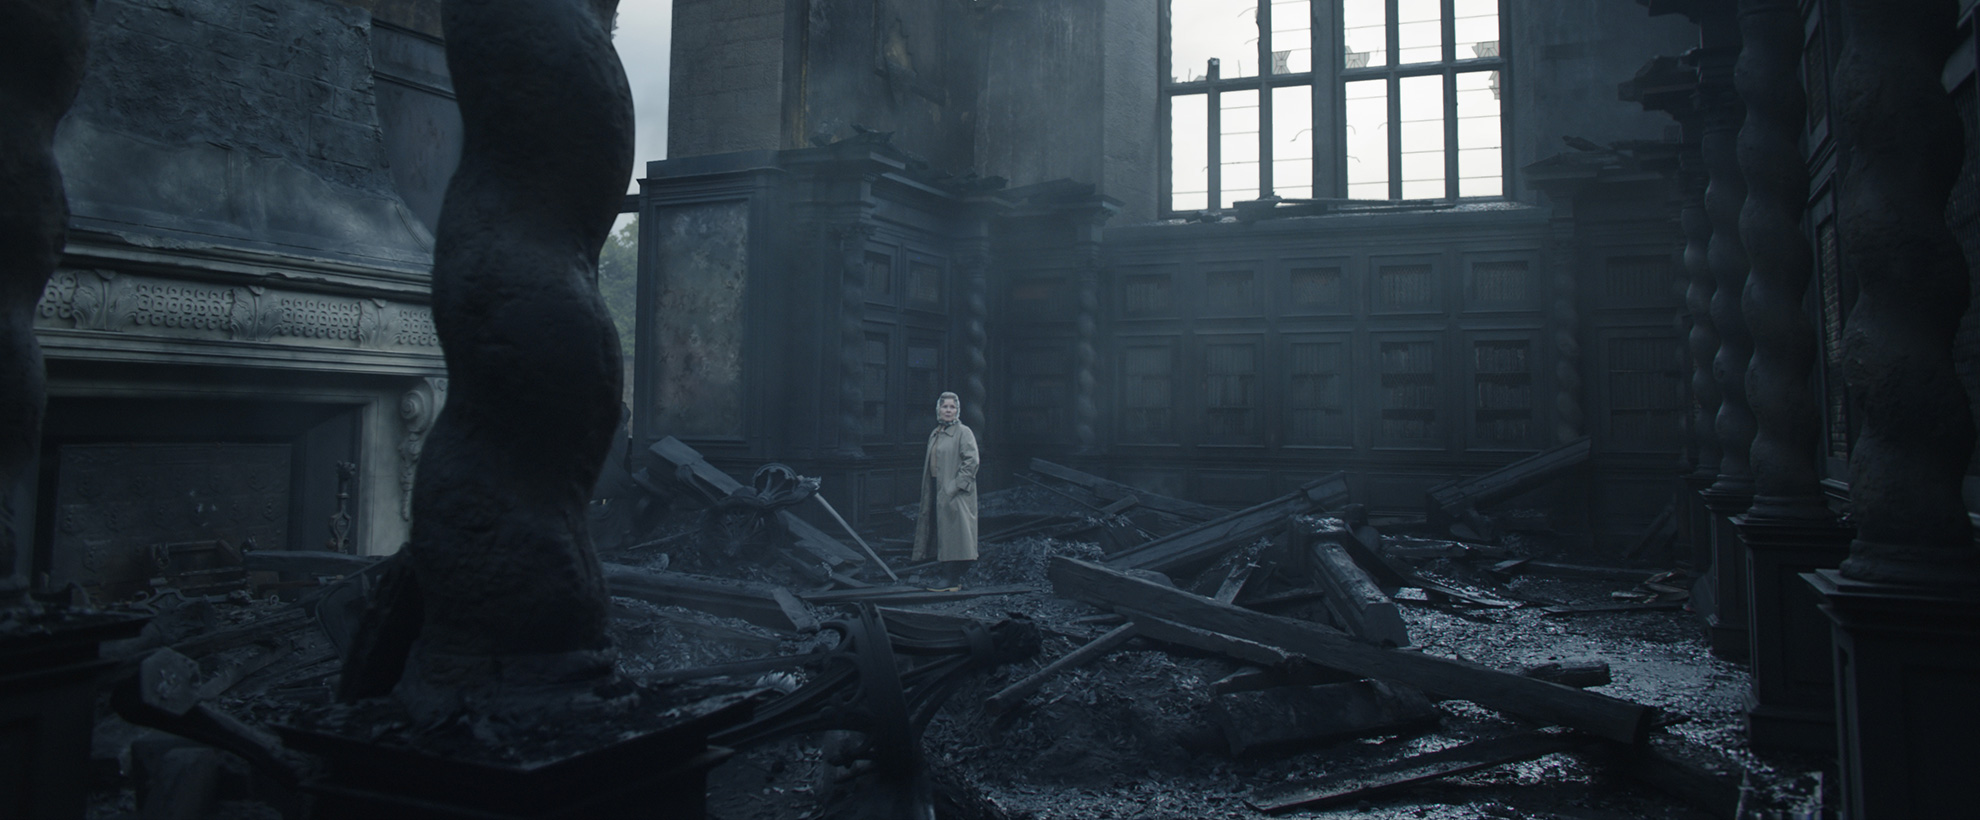 Imelda Staunton as the Queen, standing in the burned wreckage of the palace after a fire